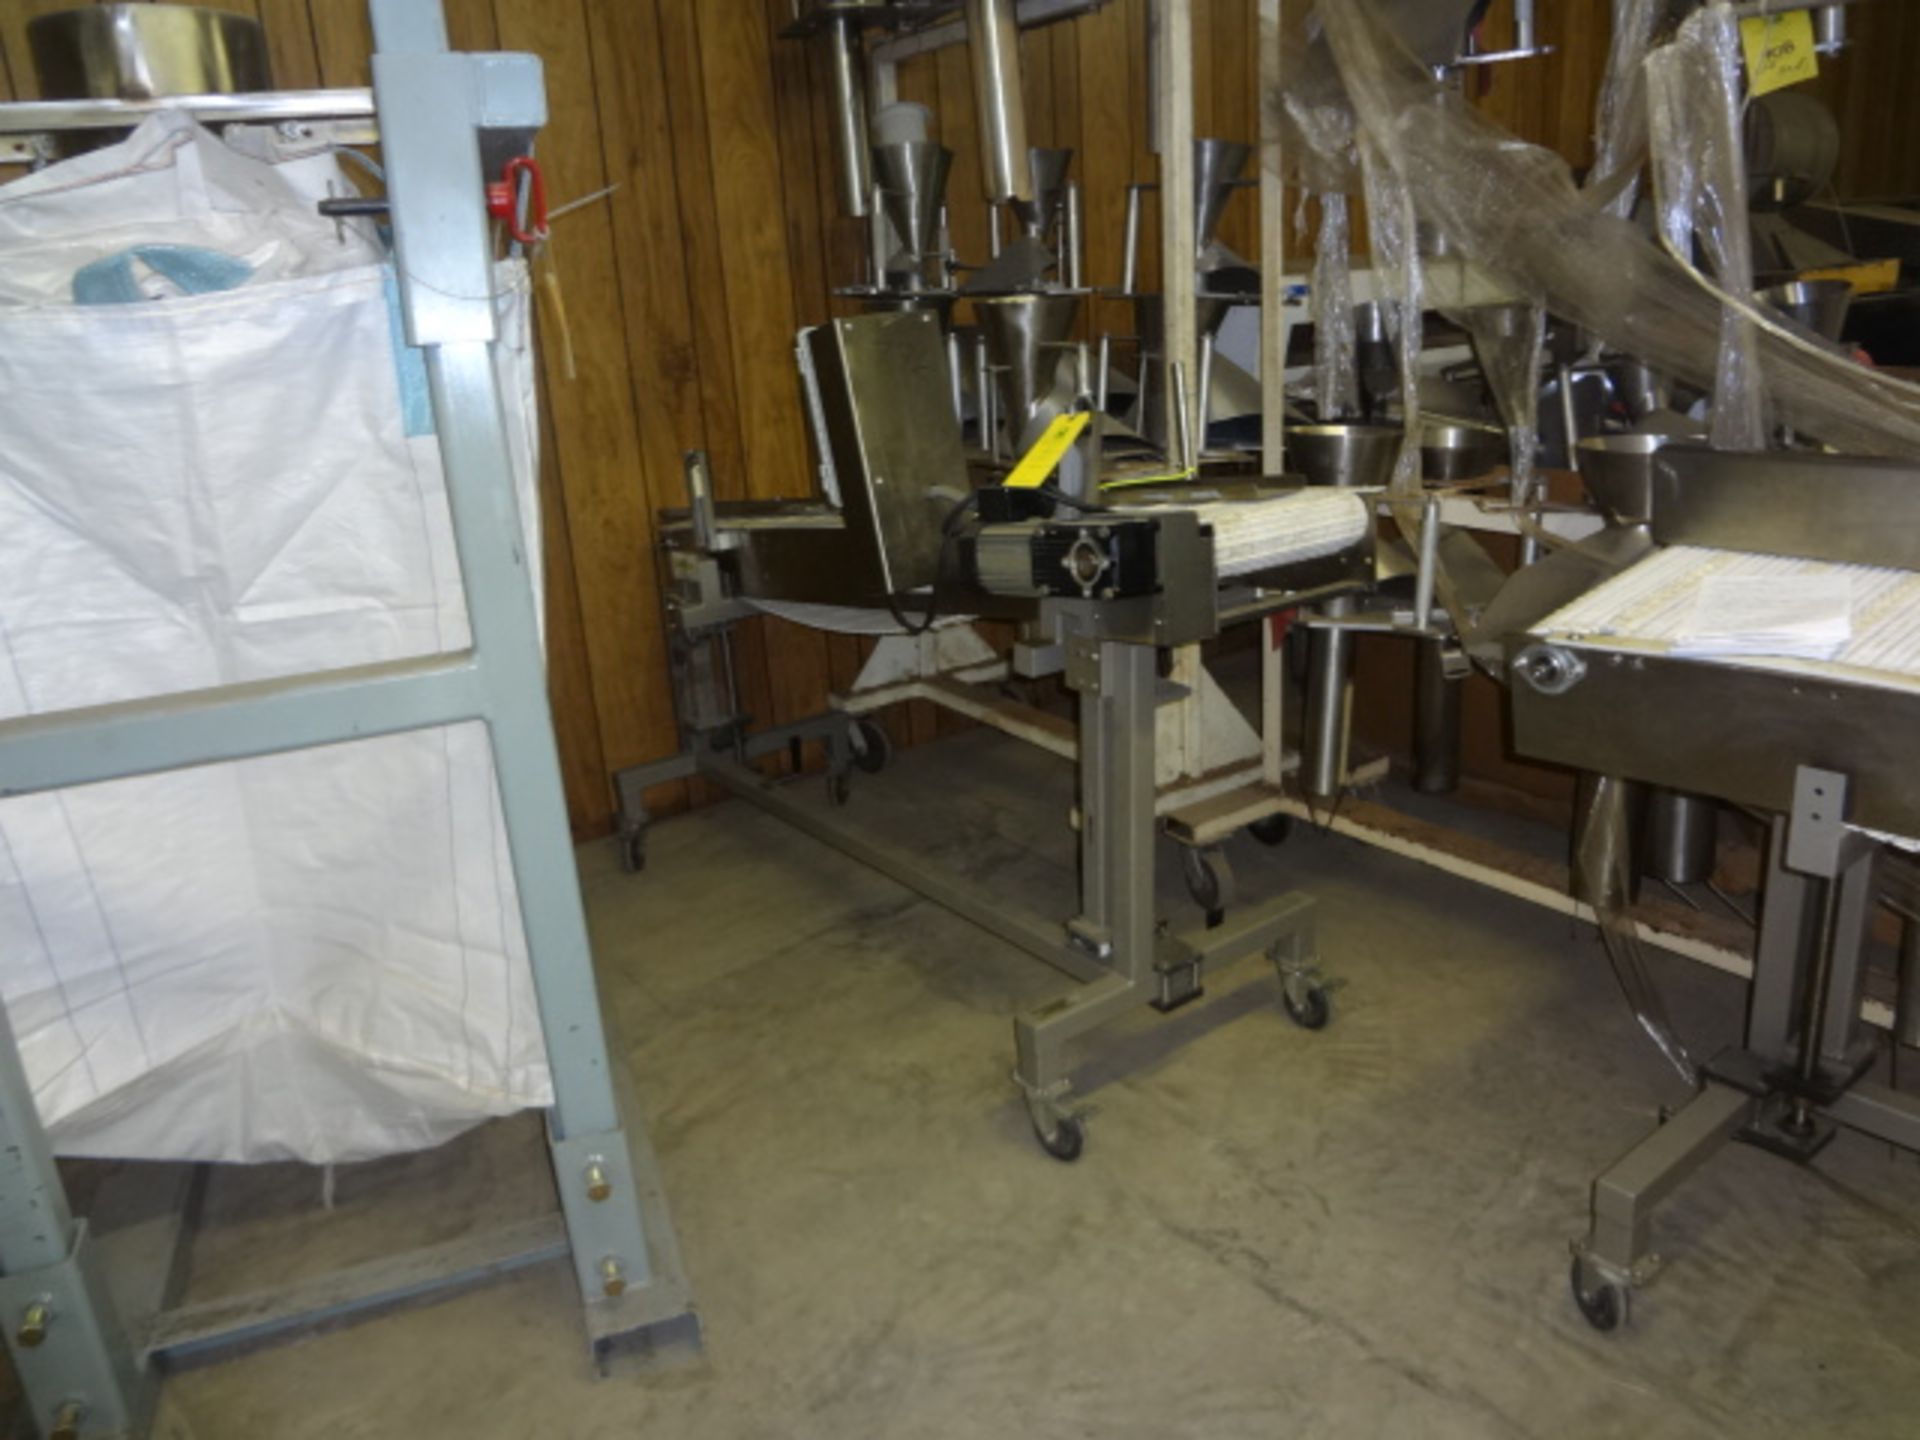 qty 2 - 14 “ w x 6’ l belt conveyor Rigging Fee for the item: $50 - Image 3 of 3